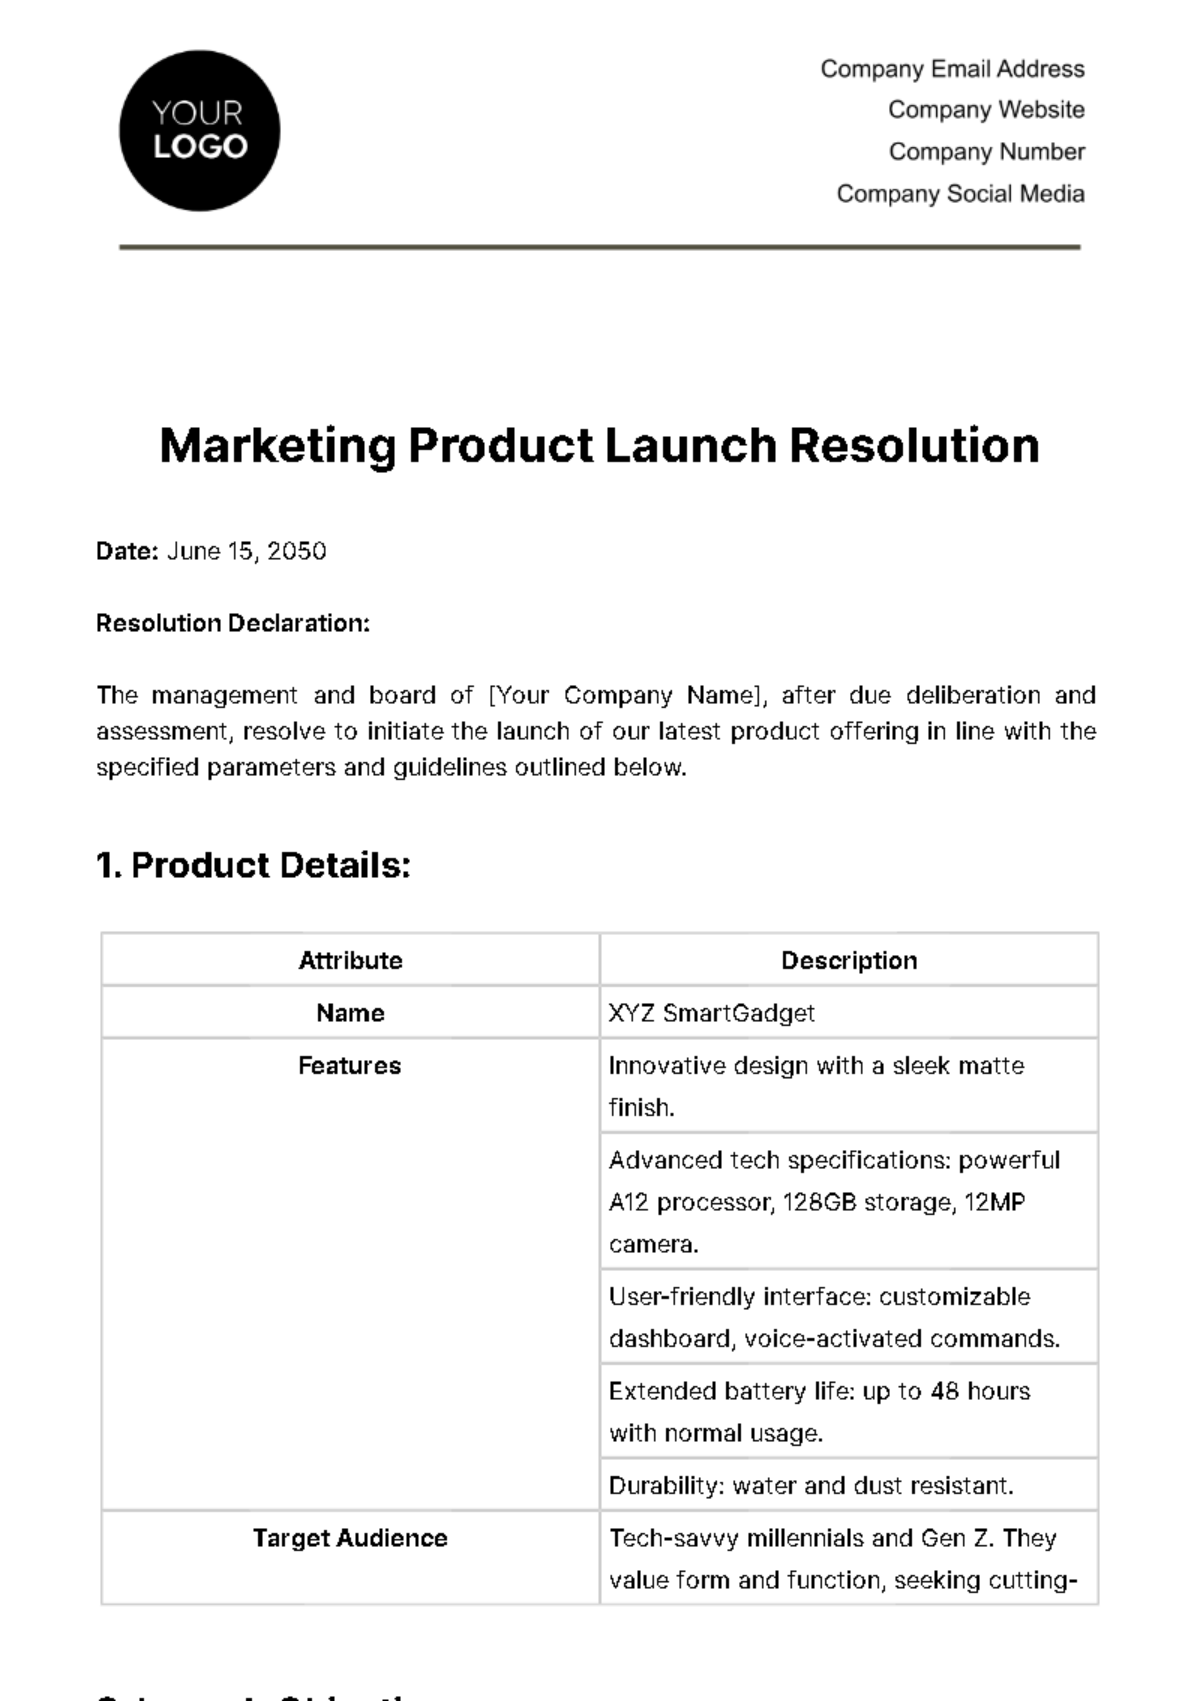 Free Marketing Product Launch Resolution Template